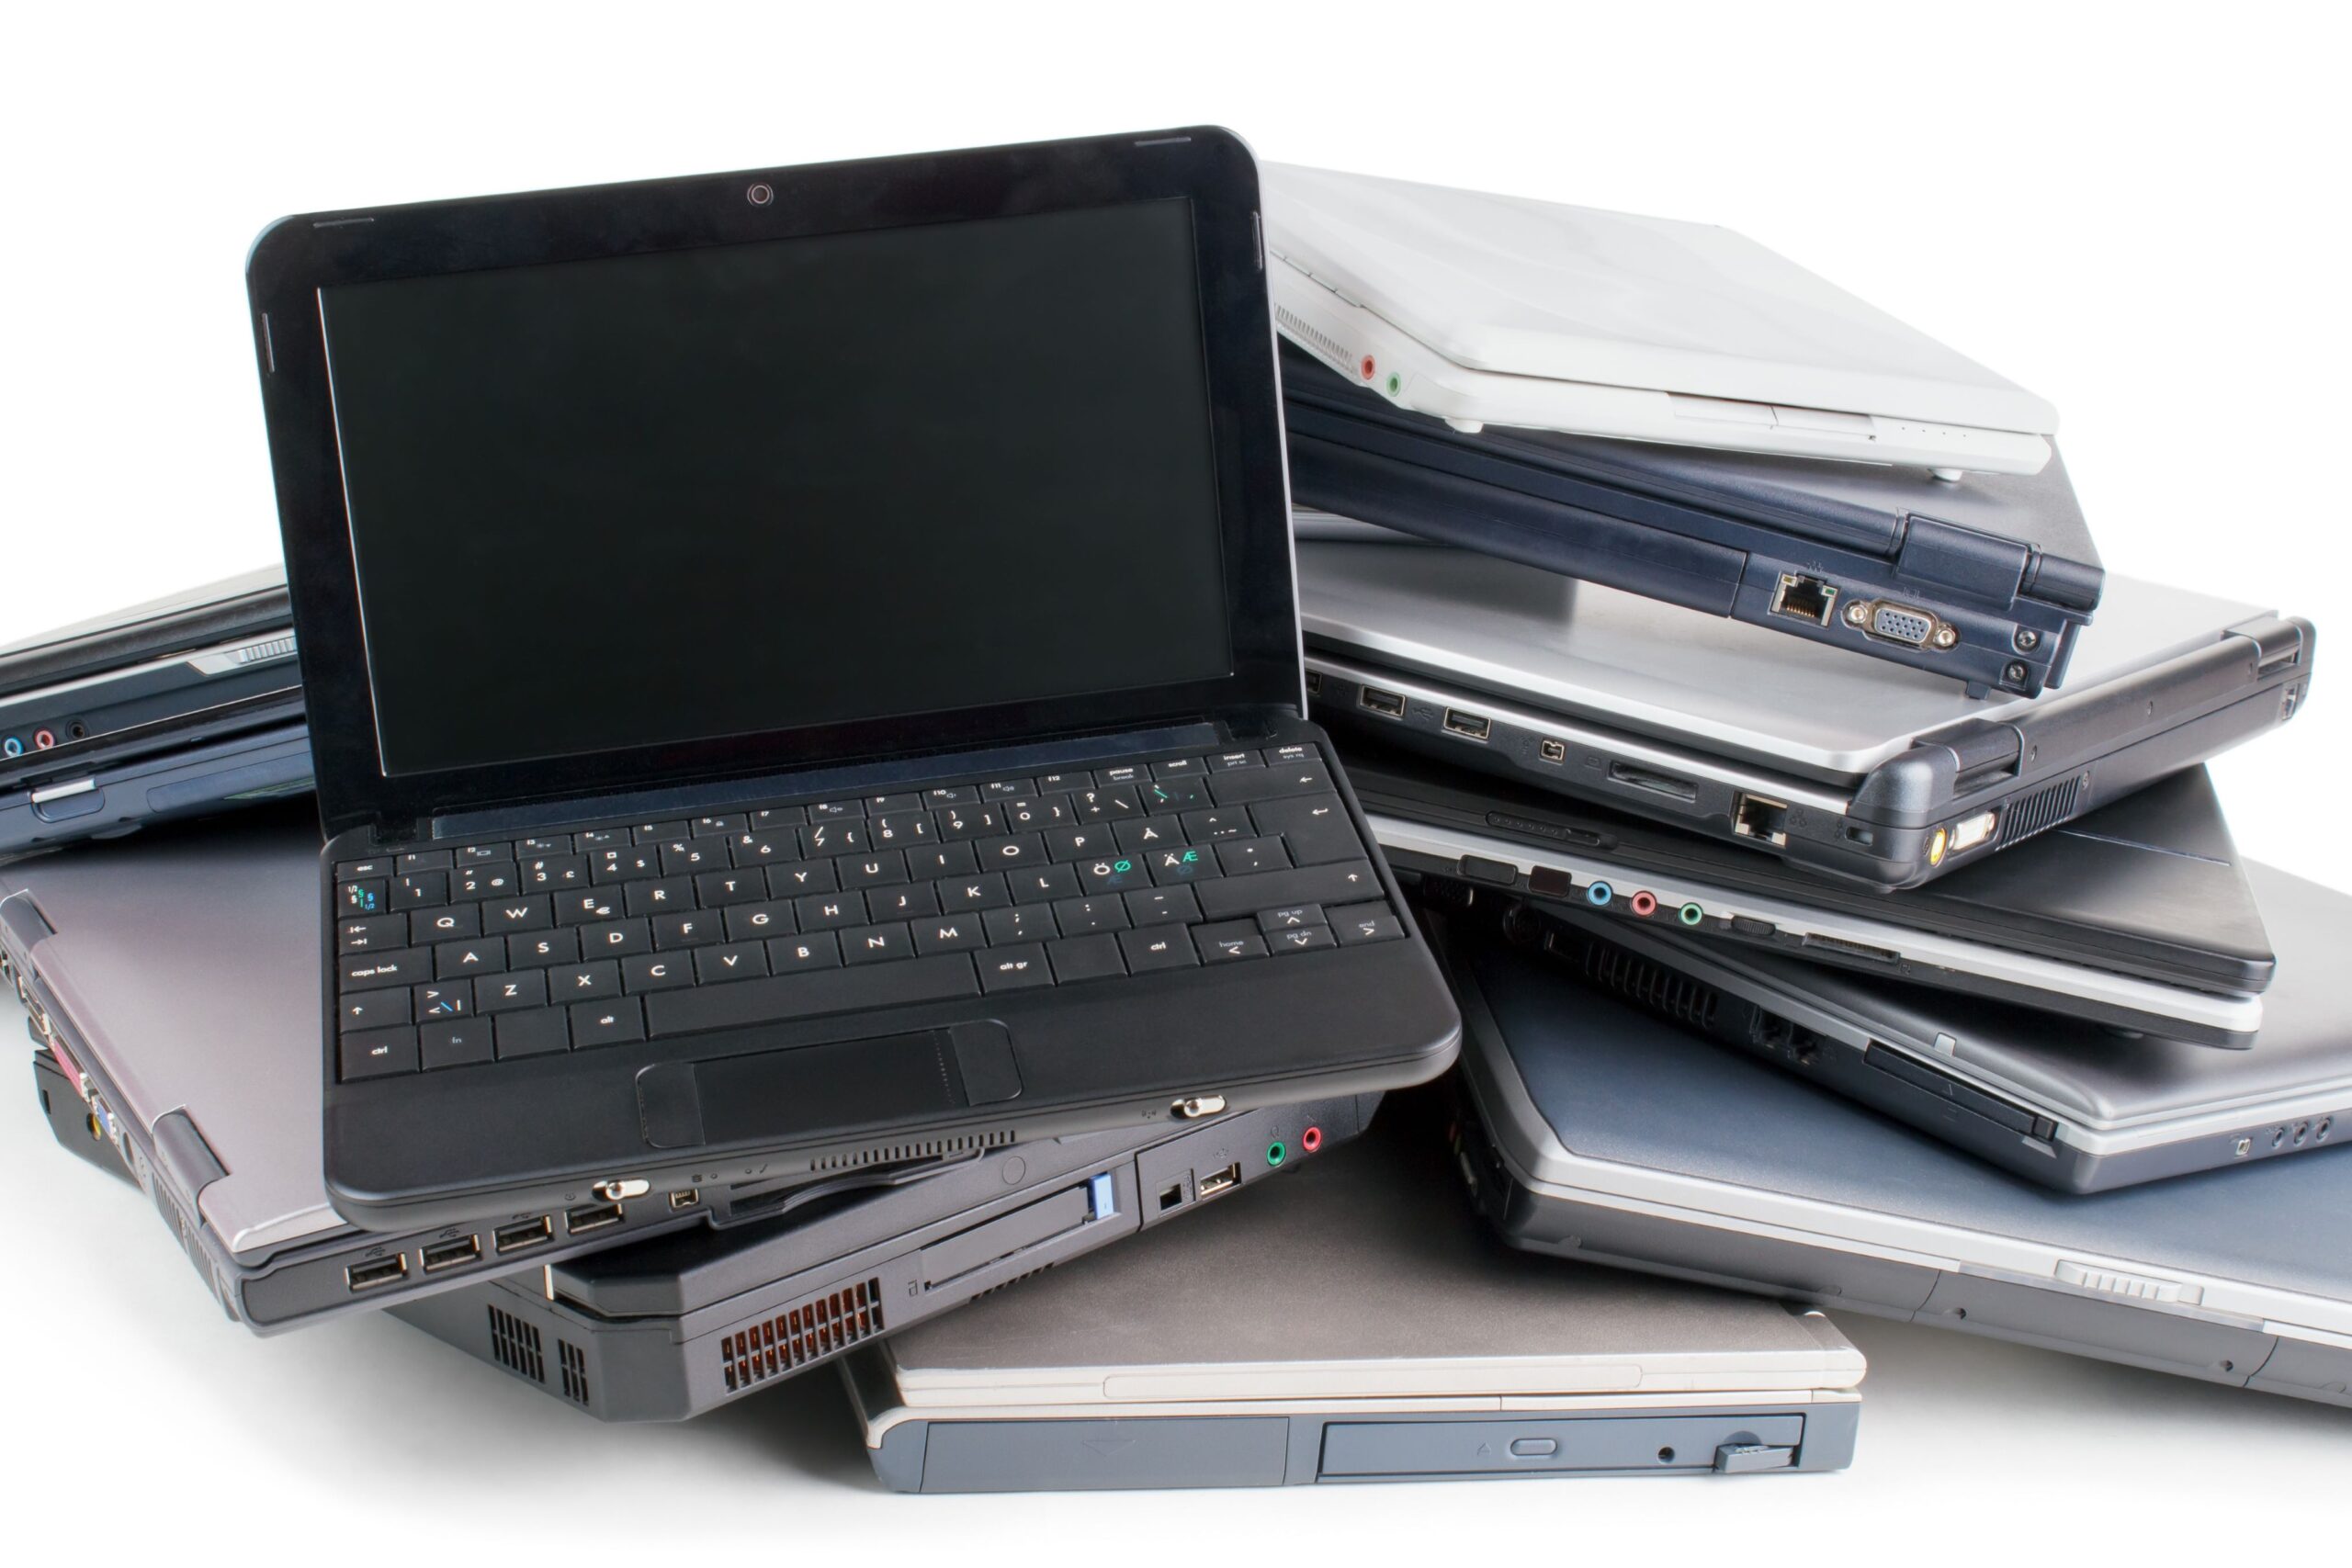 Pile of old laptops